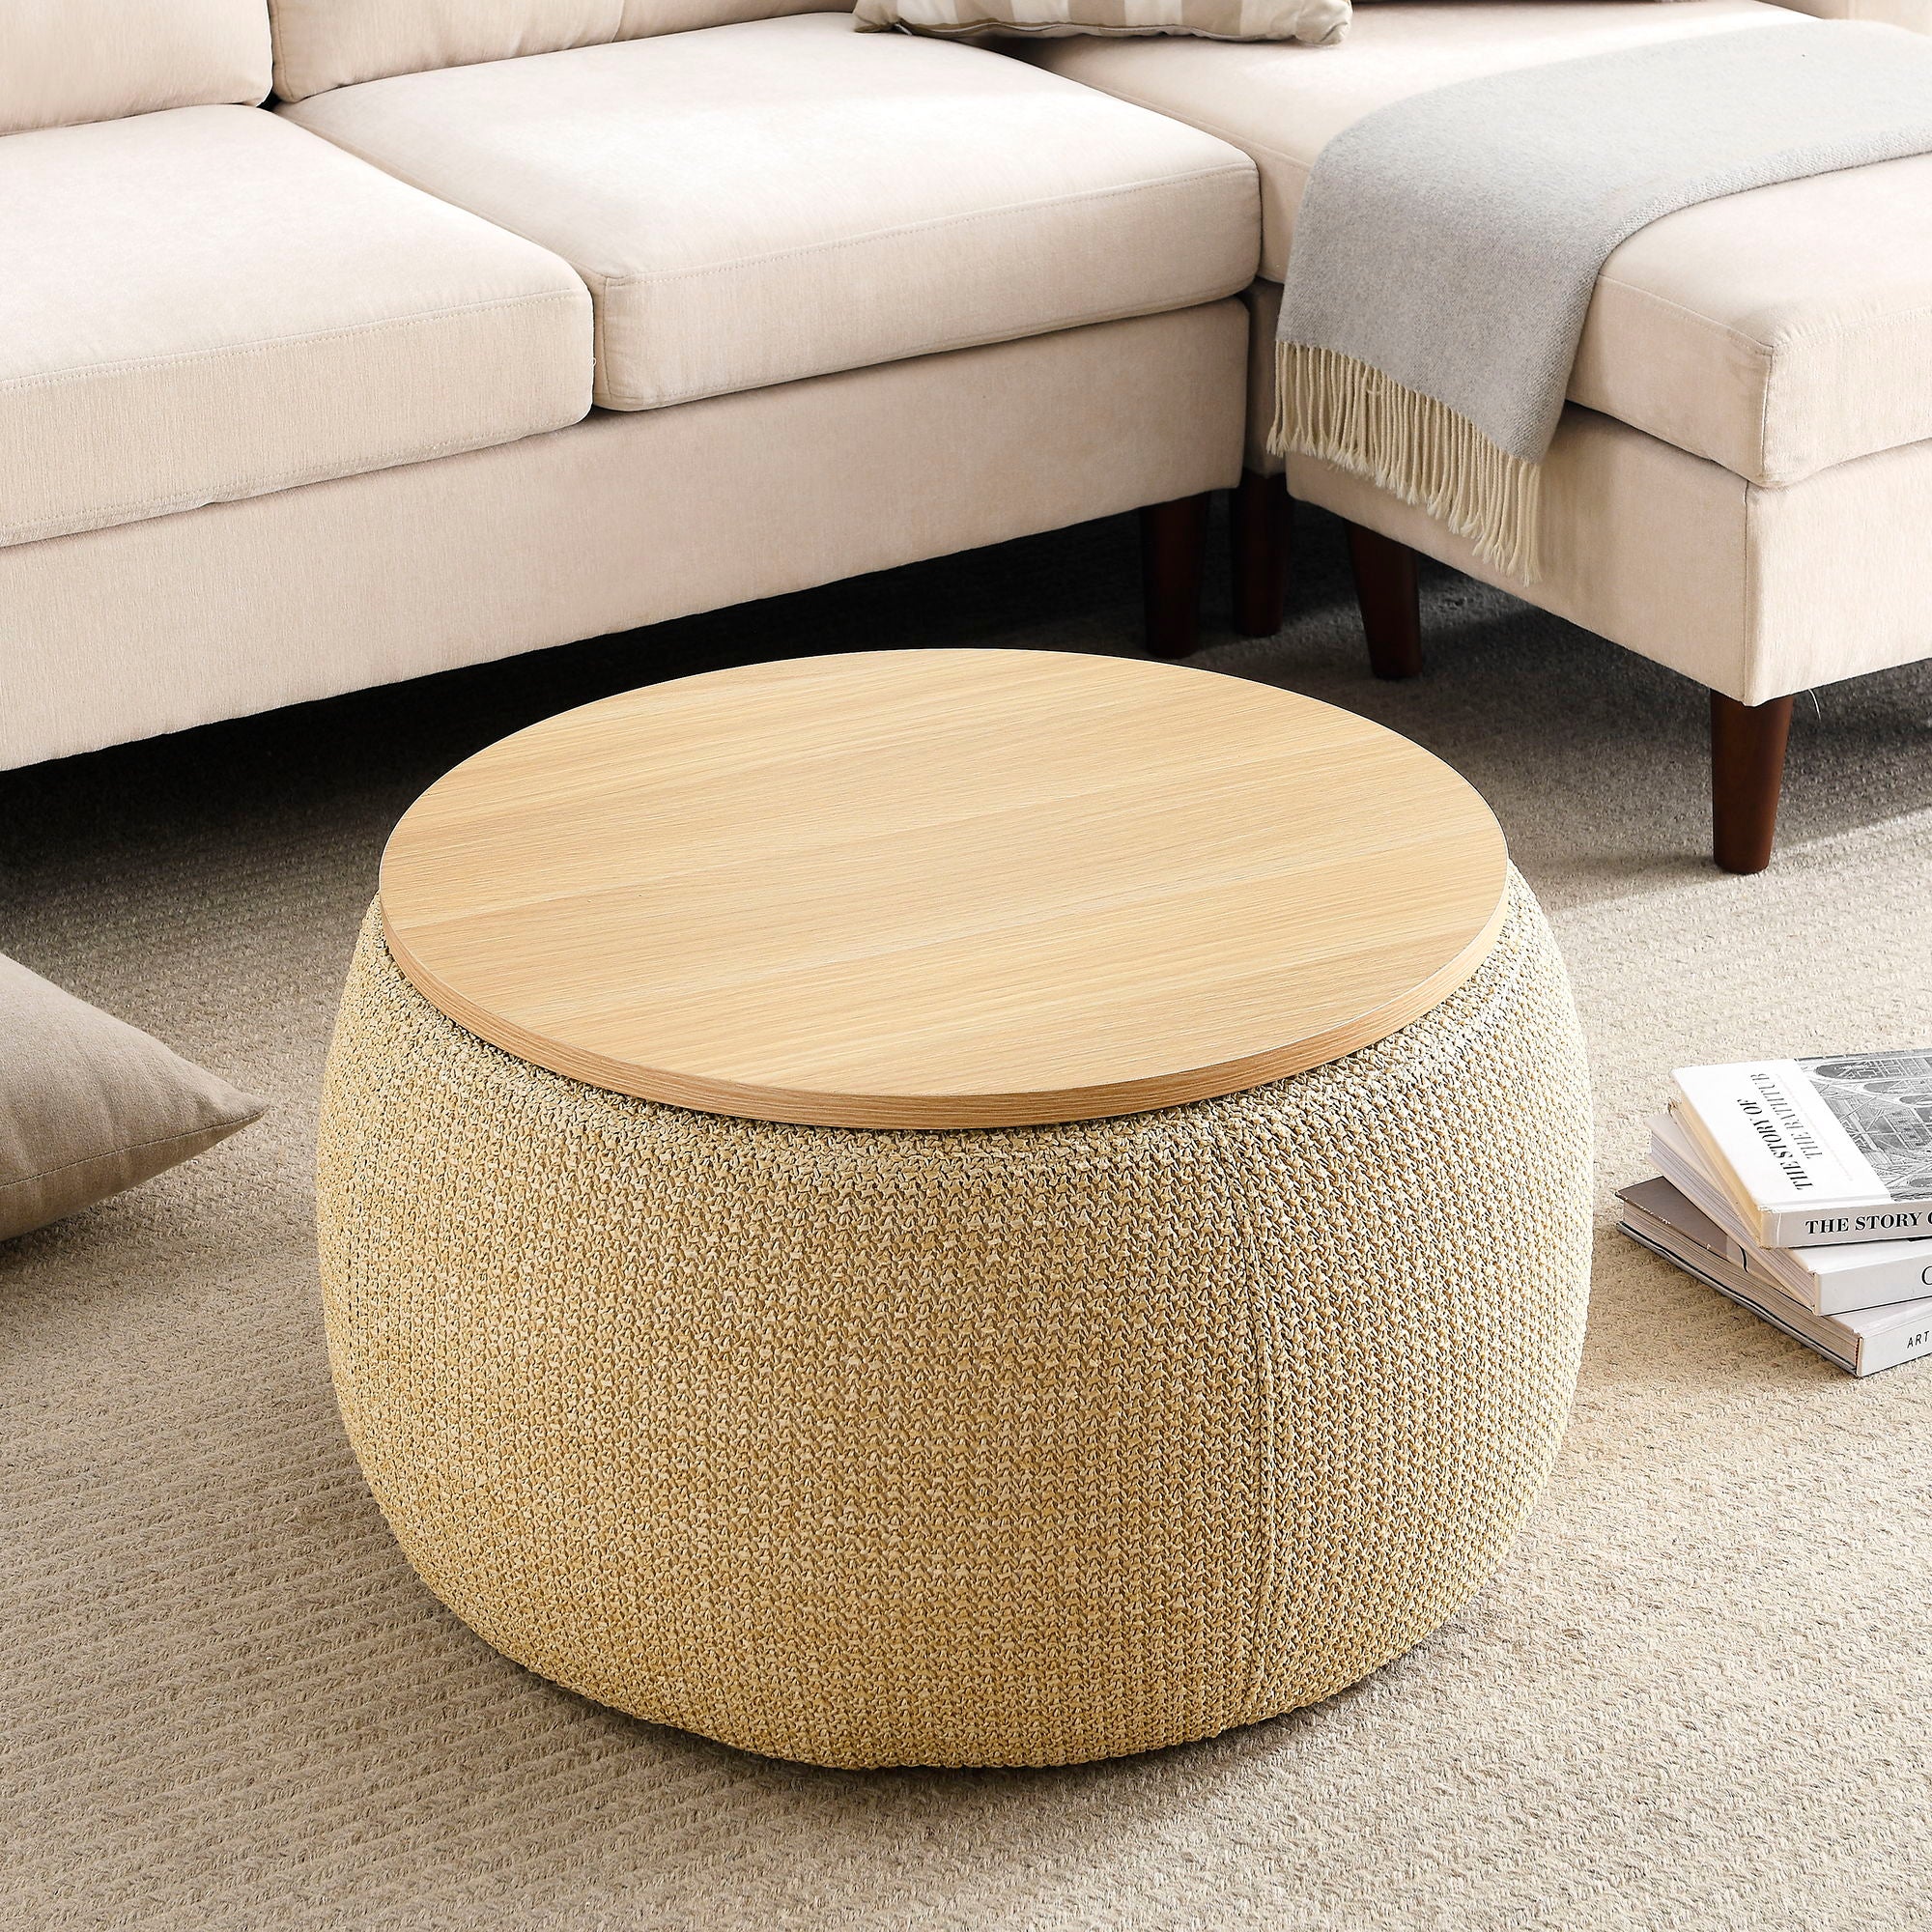 Round Storage Ottoman, 2 In 1 Function, Work As End Table And Ottoman, Natural (25.5" X25.5" X14.5" )